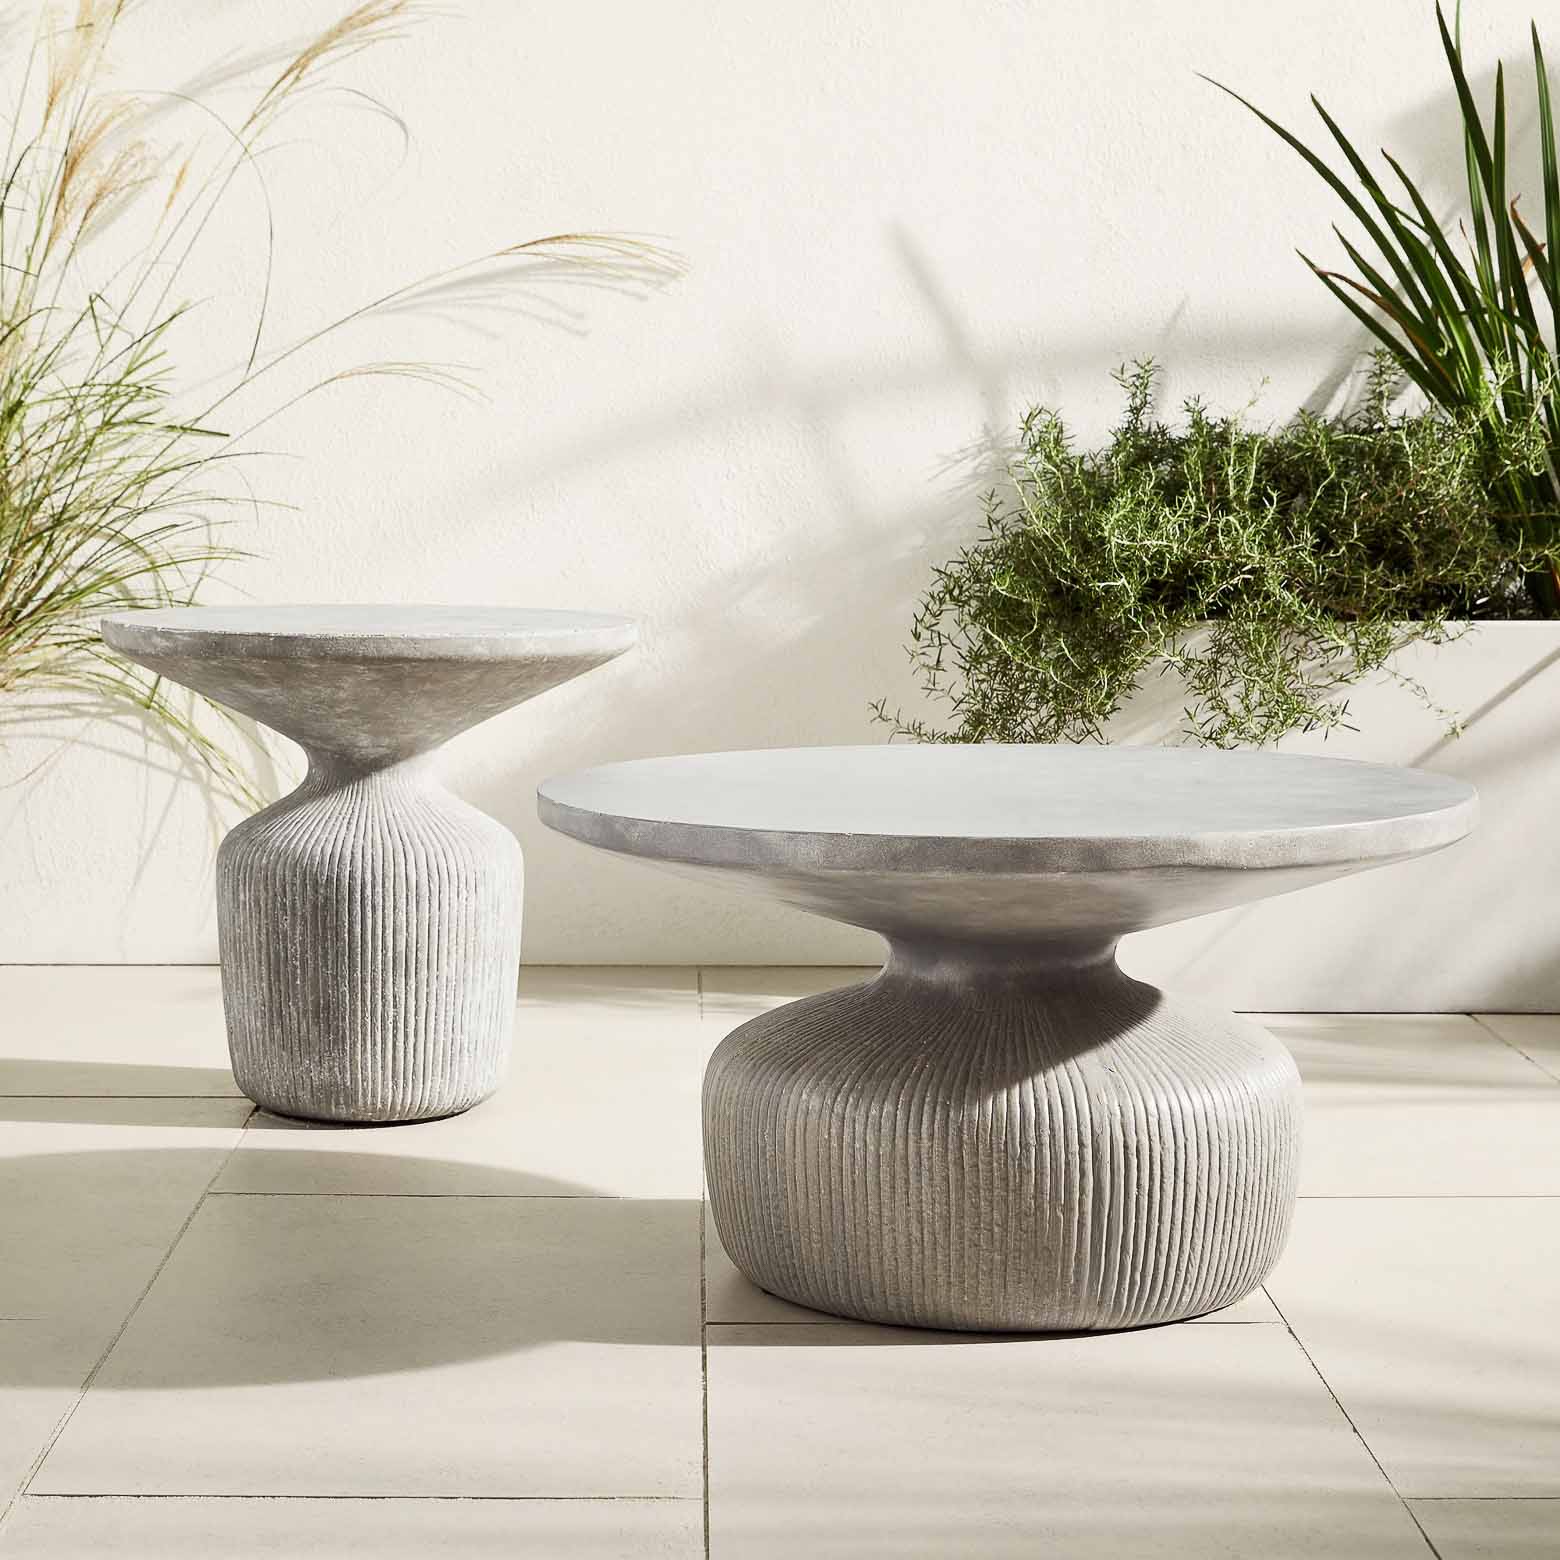 Favorite Stone-Like and Concrete Looking Outdoor Accent Tables and Side Tables